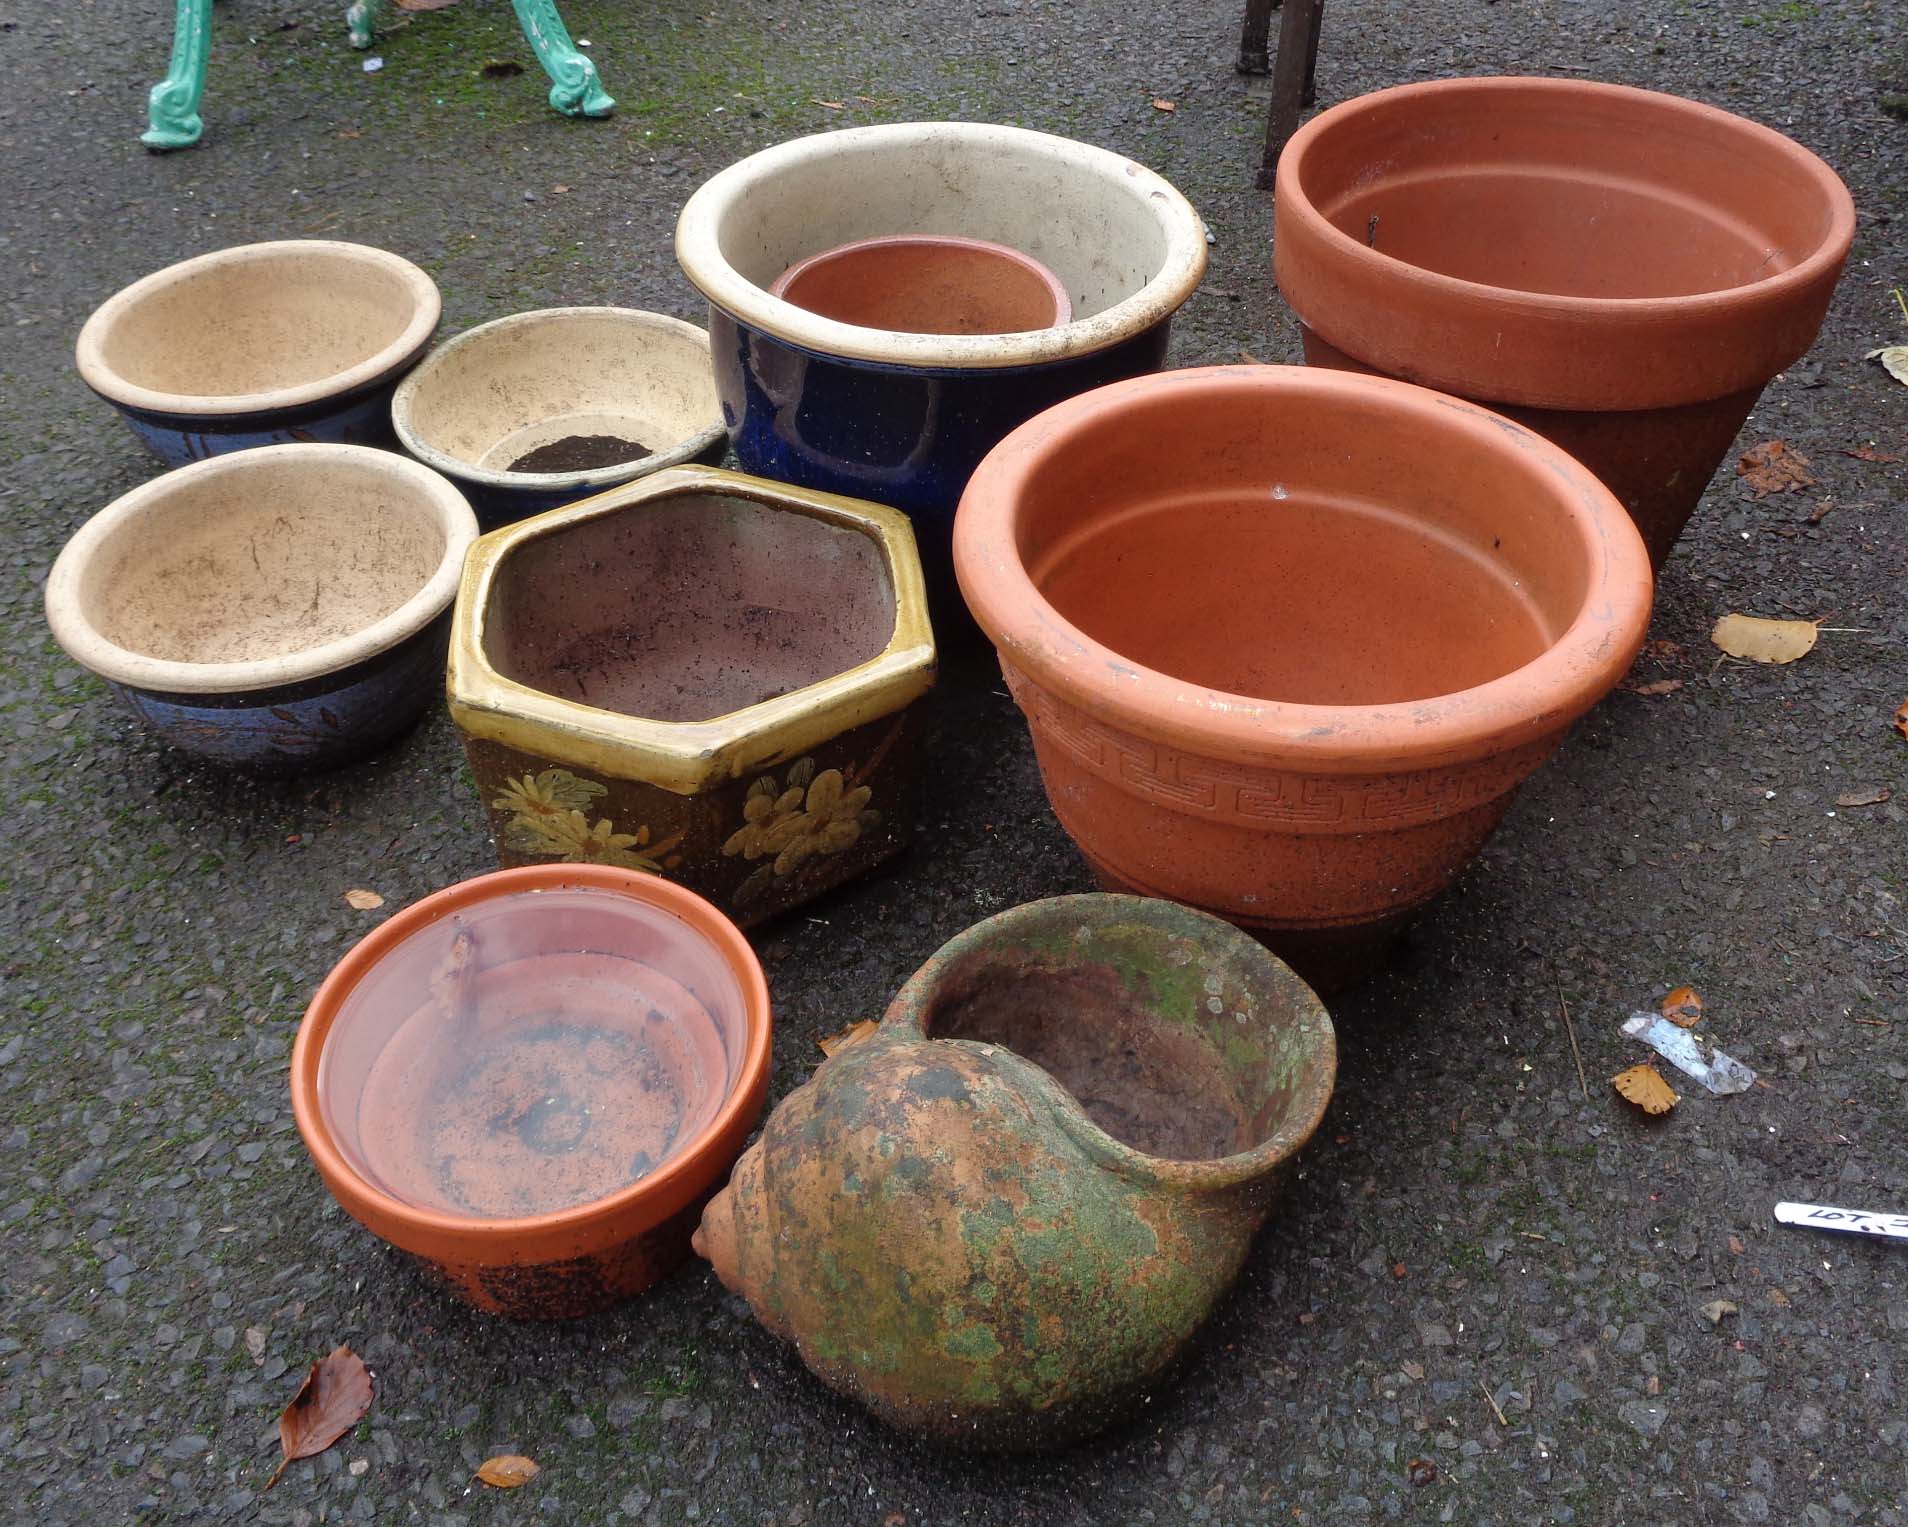 Various terracotta and other plant pots